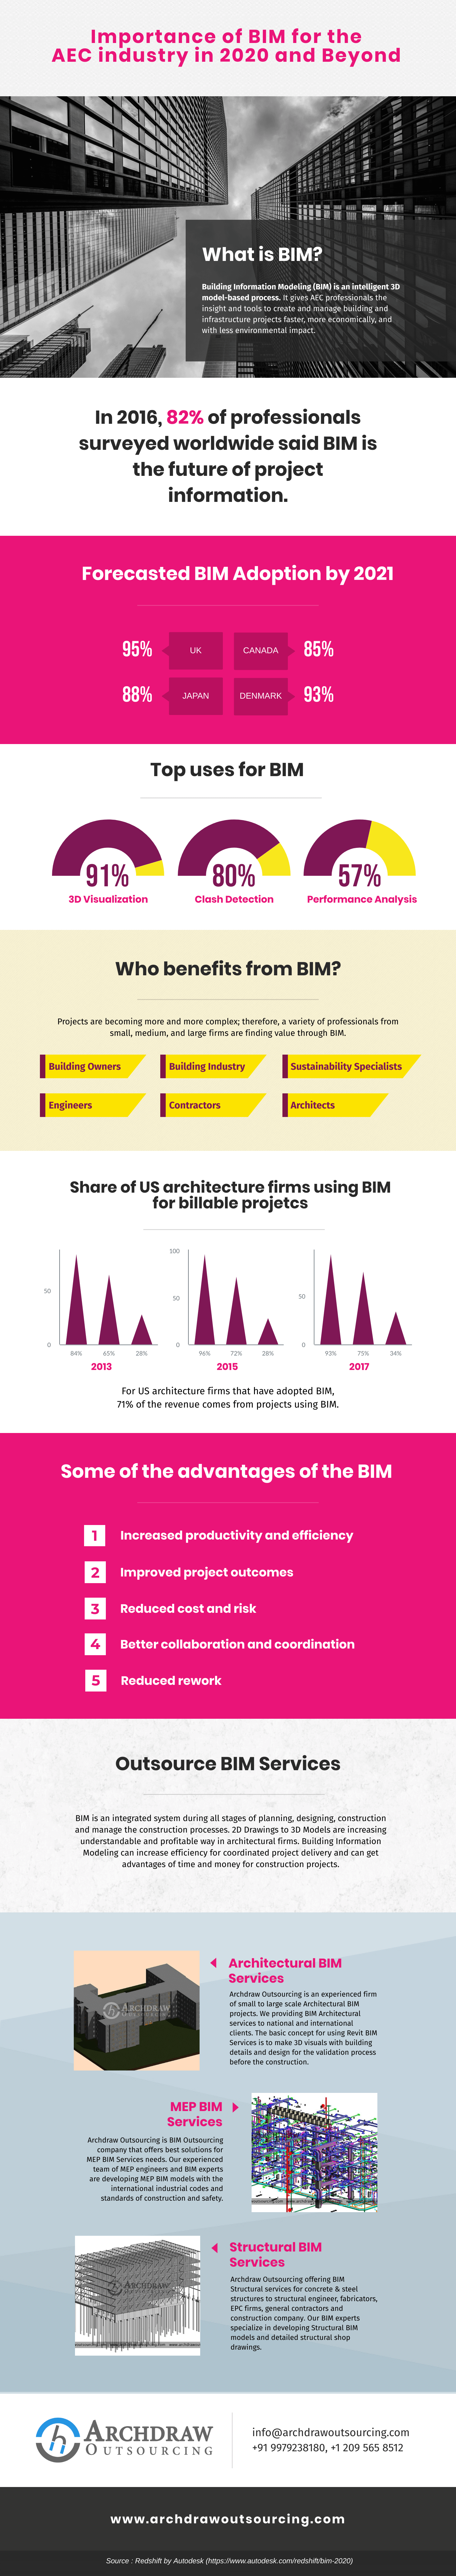 Importance of BIM for the AEC Industry in 2020 and beyond - Inforgraphic